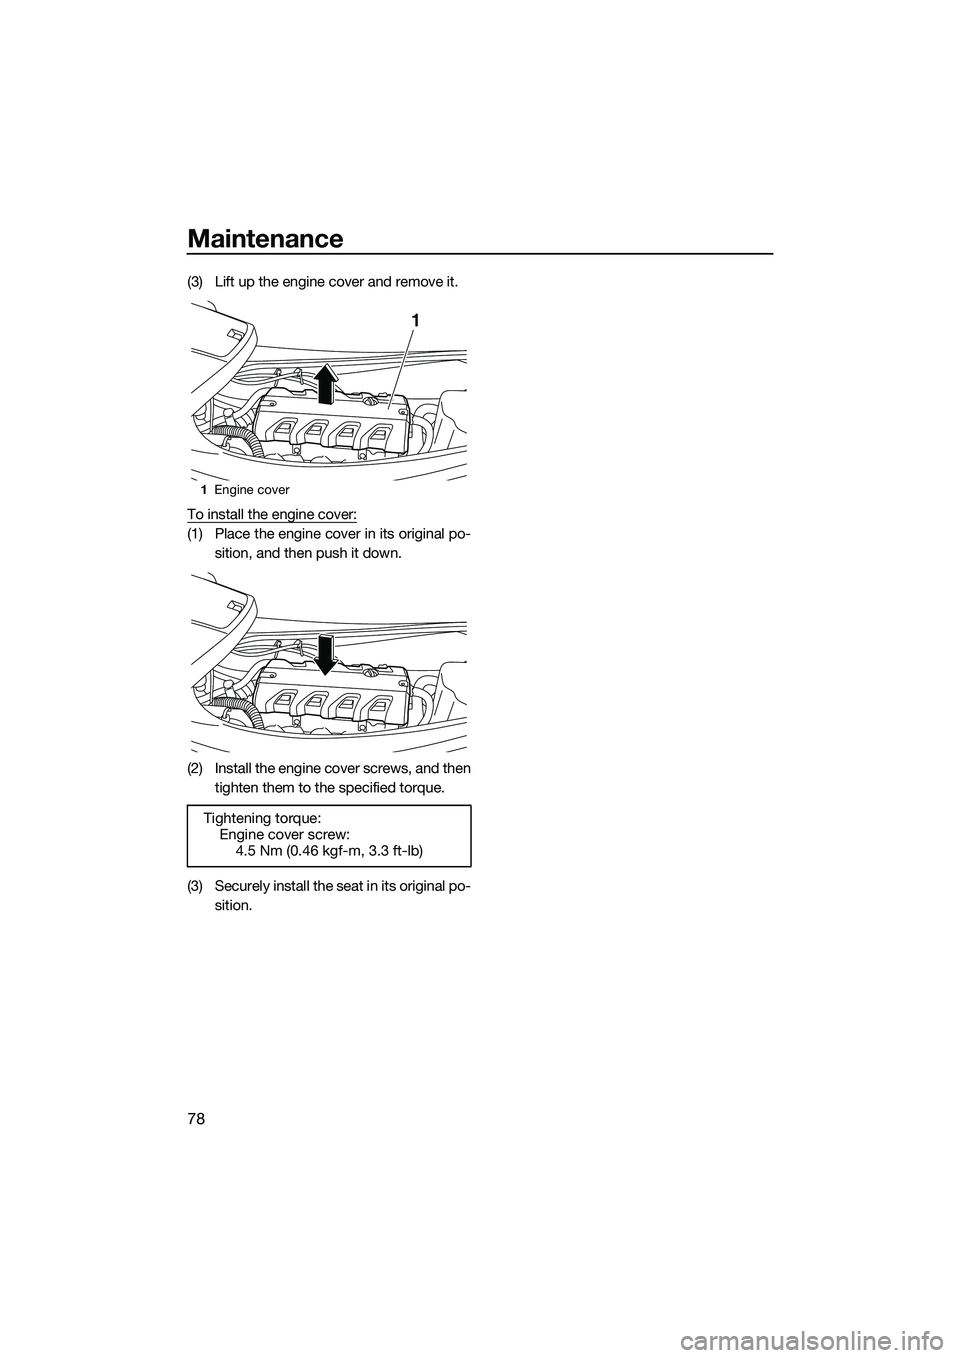 YAMAHA VXR 2014  Owners Manual Maintenance
78
(3) Lift up the engine cover and remove it.
To install the engine cover:
(1) Place the engine cover in its original po-sition, and then push it down.
(2) Install the engine cover screws